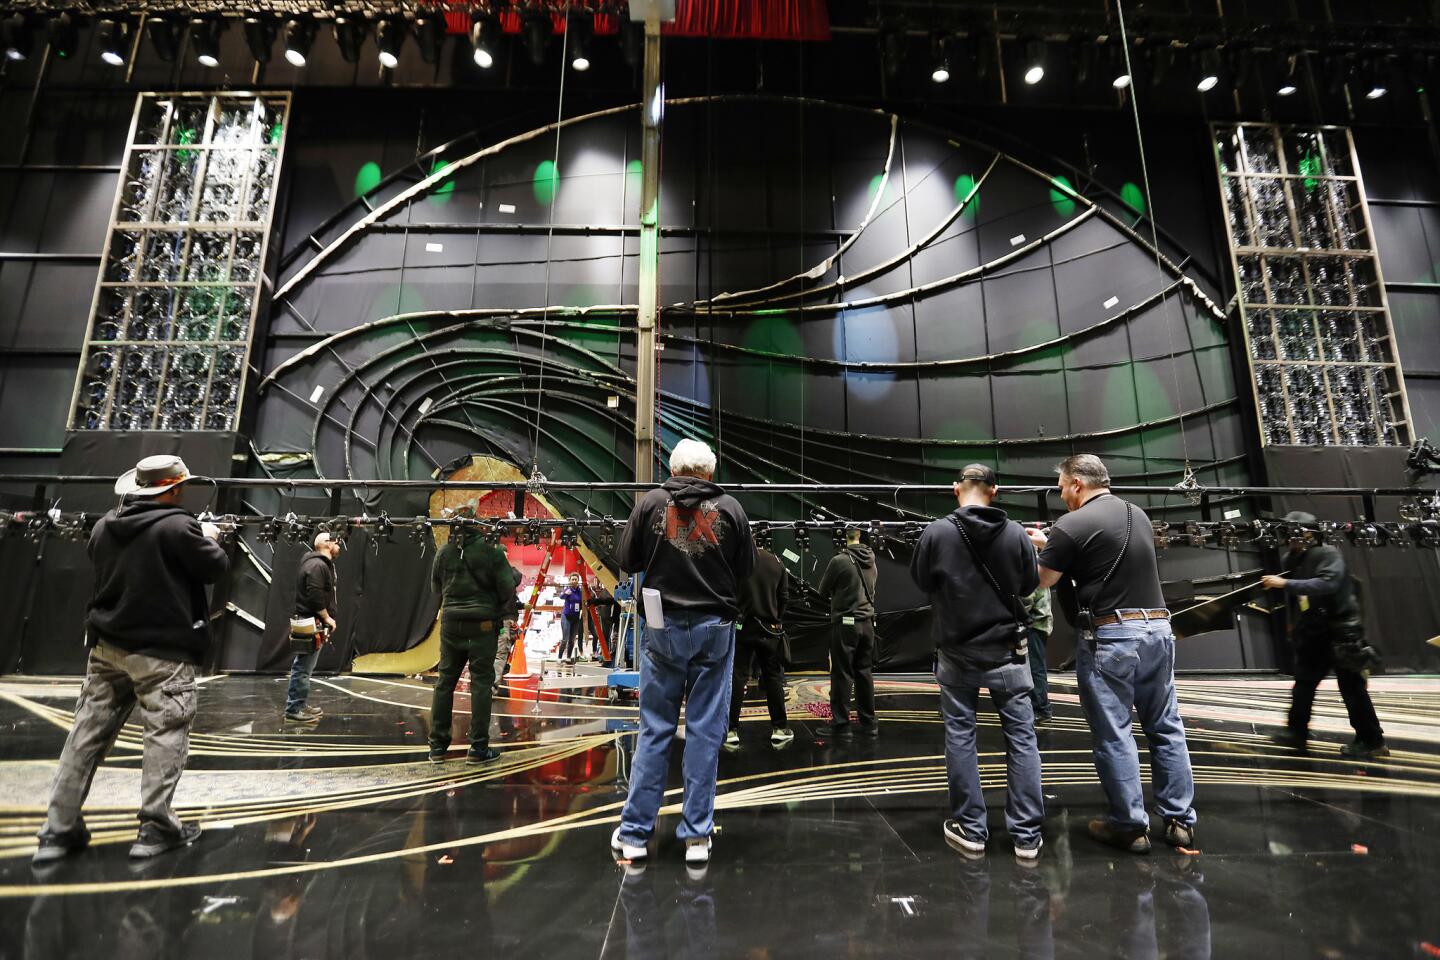 Preparations for the 2019 Oscars show